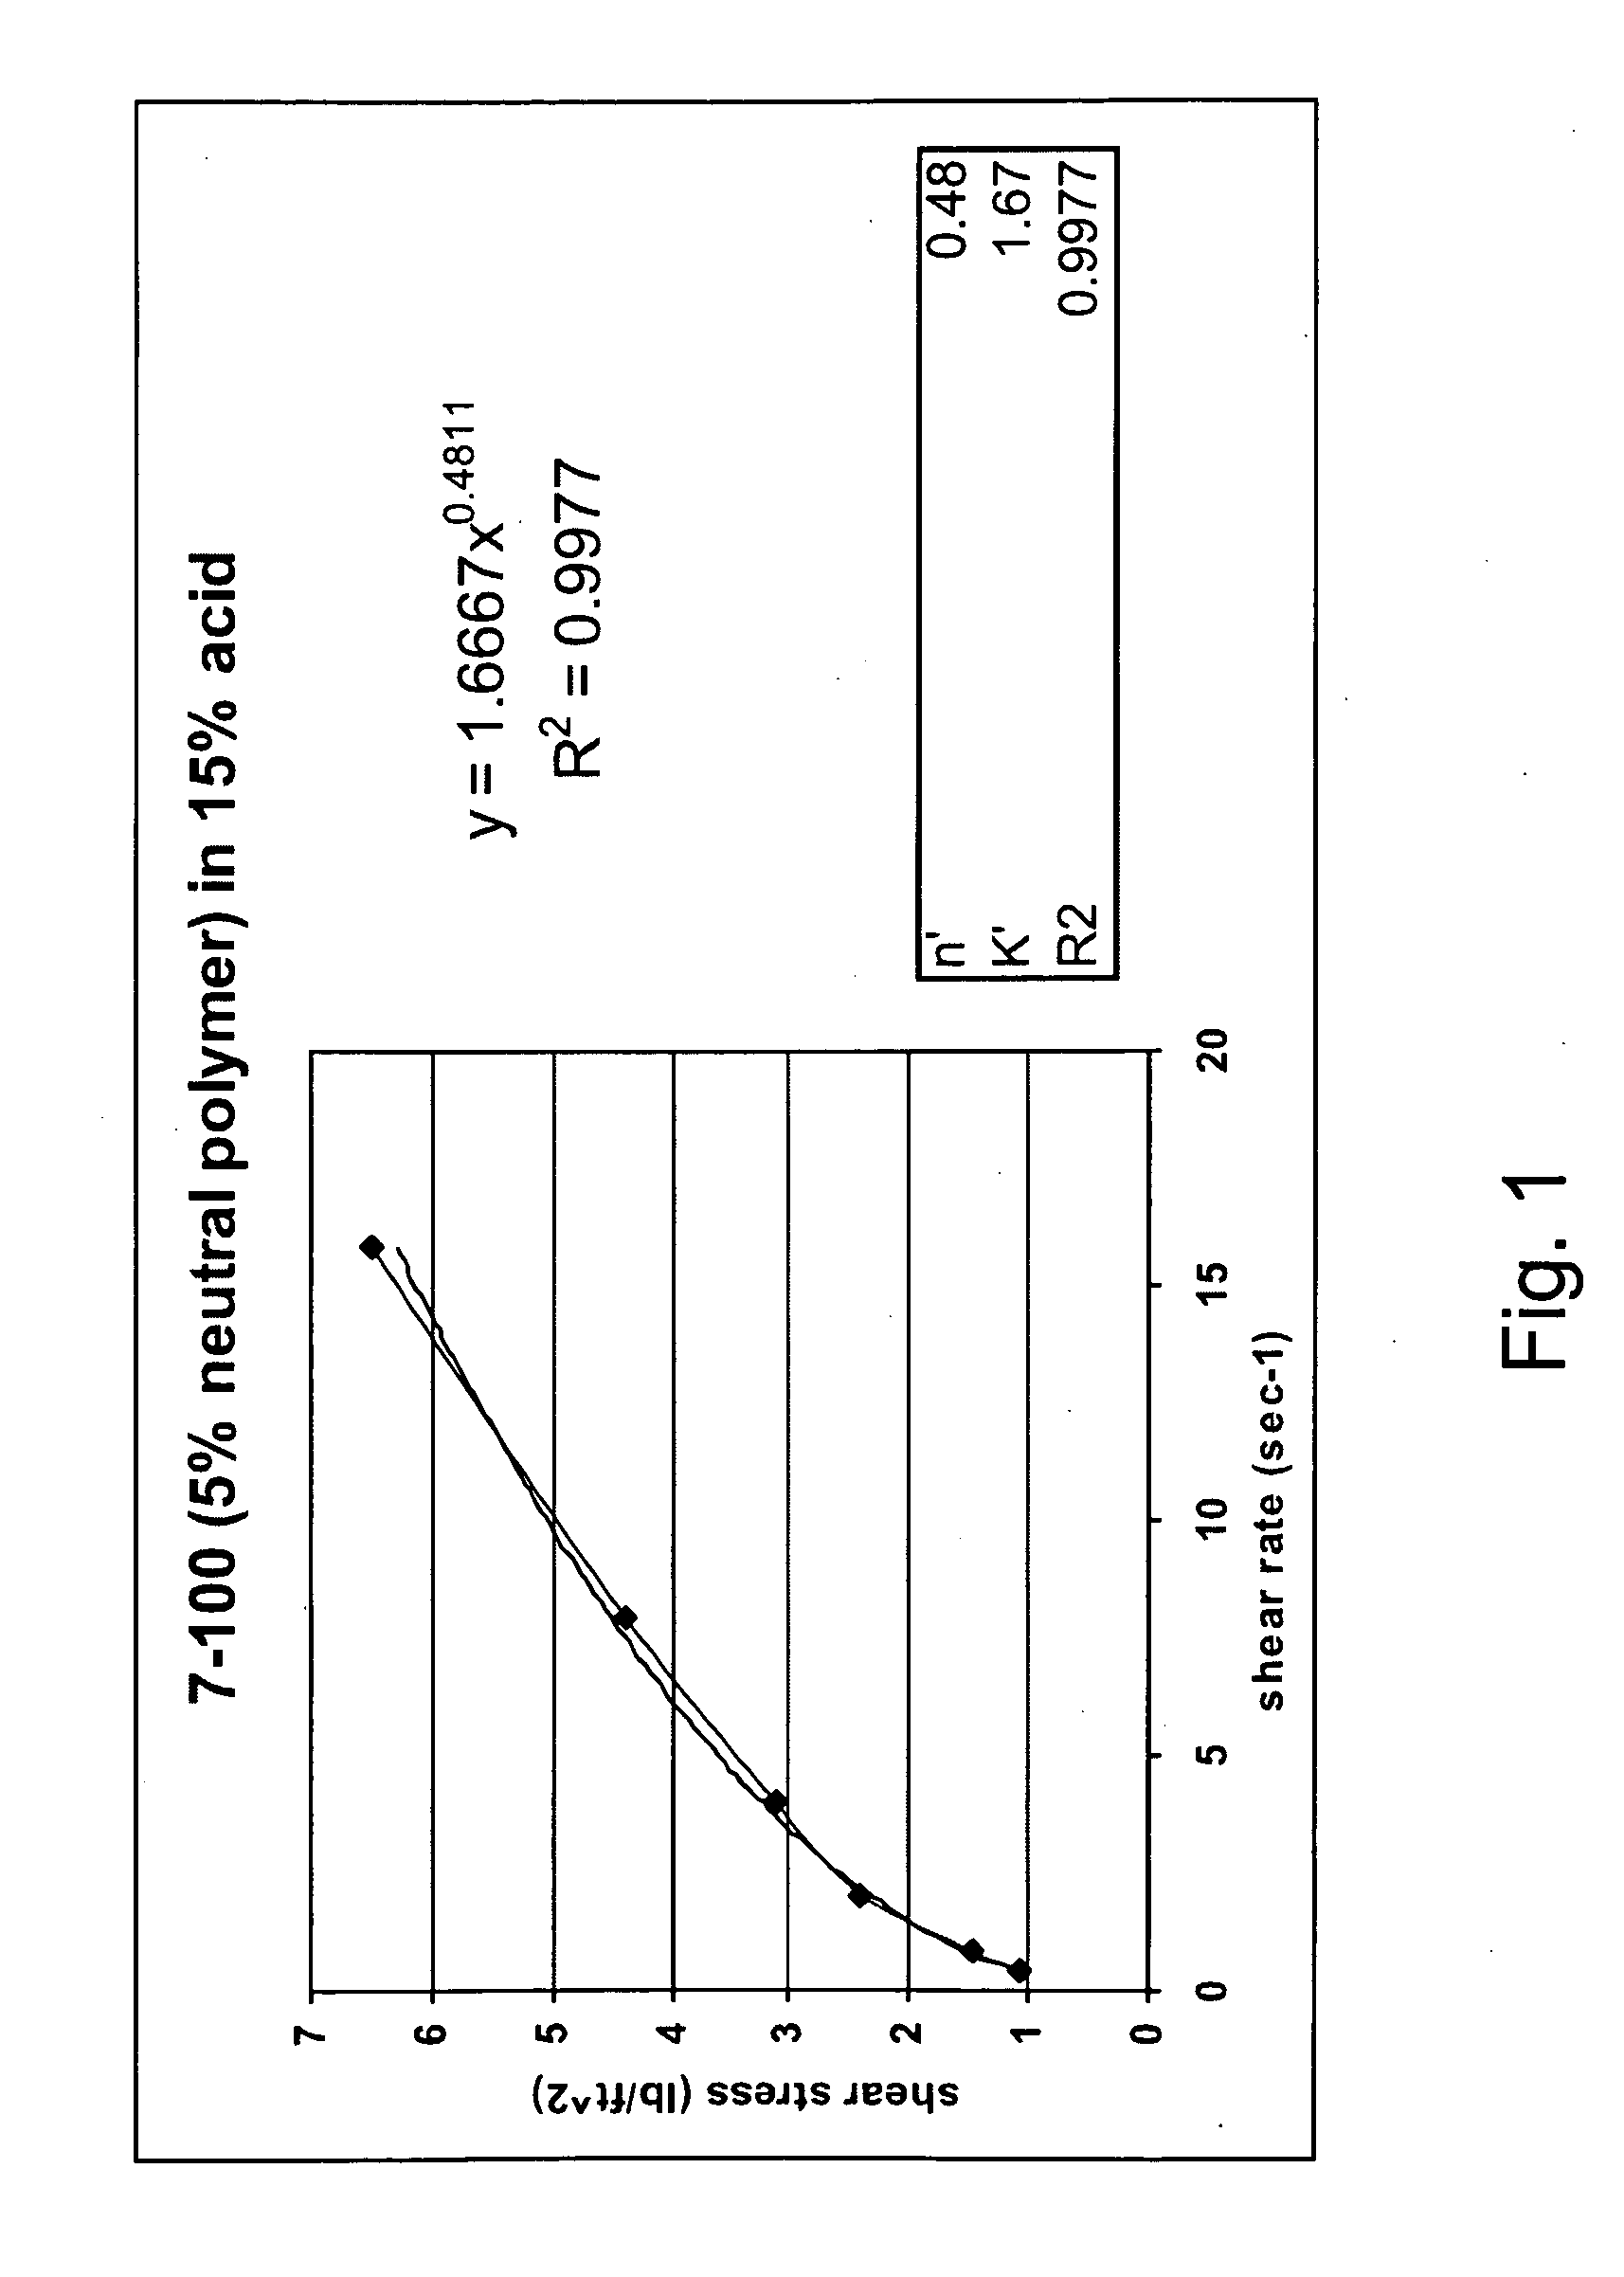 Rheology modifying agents and methods of modifying fluid rheology use in hydrocarbon recovery